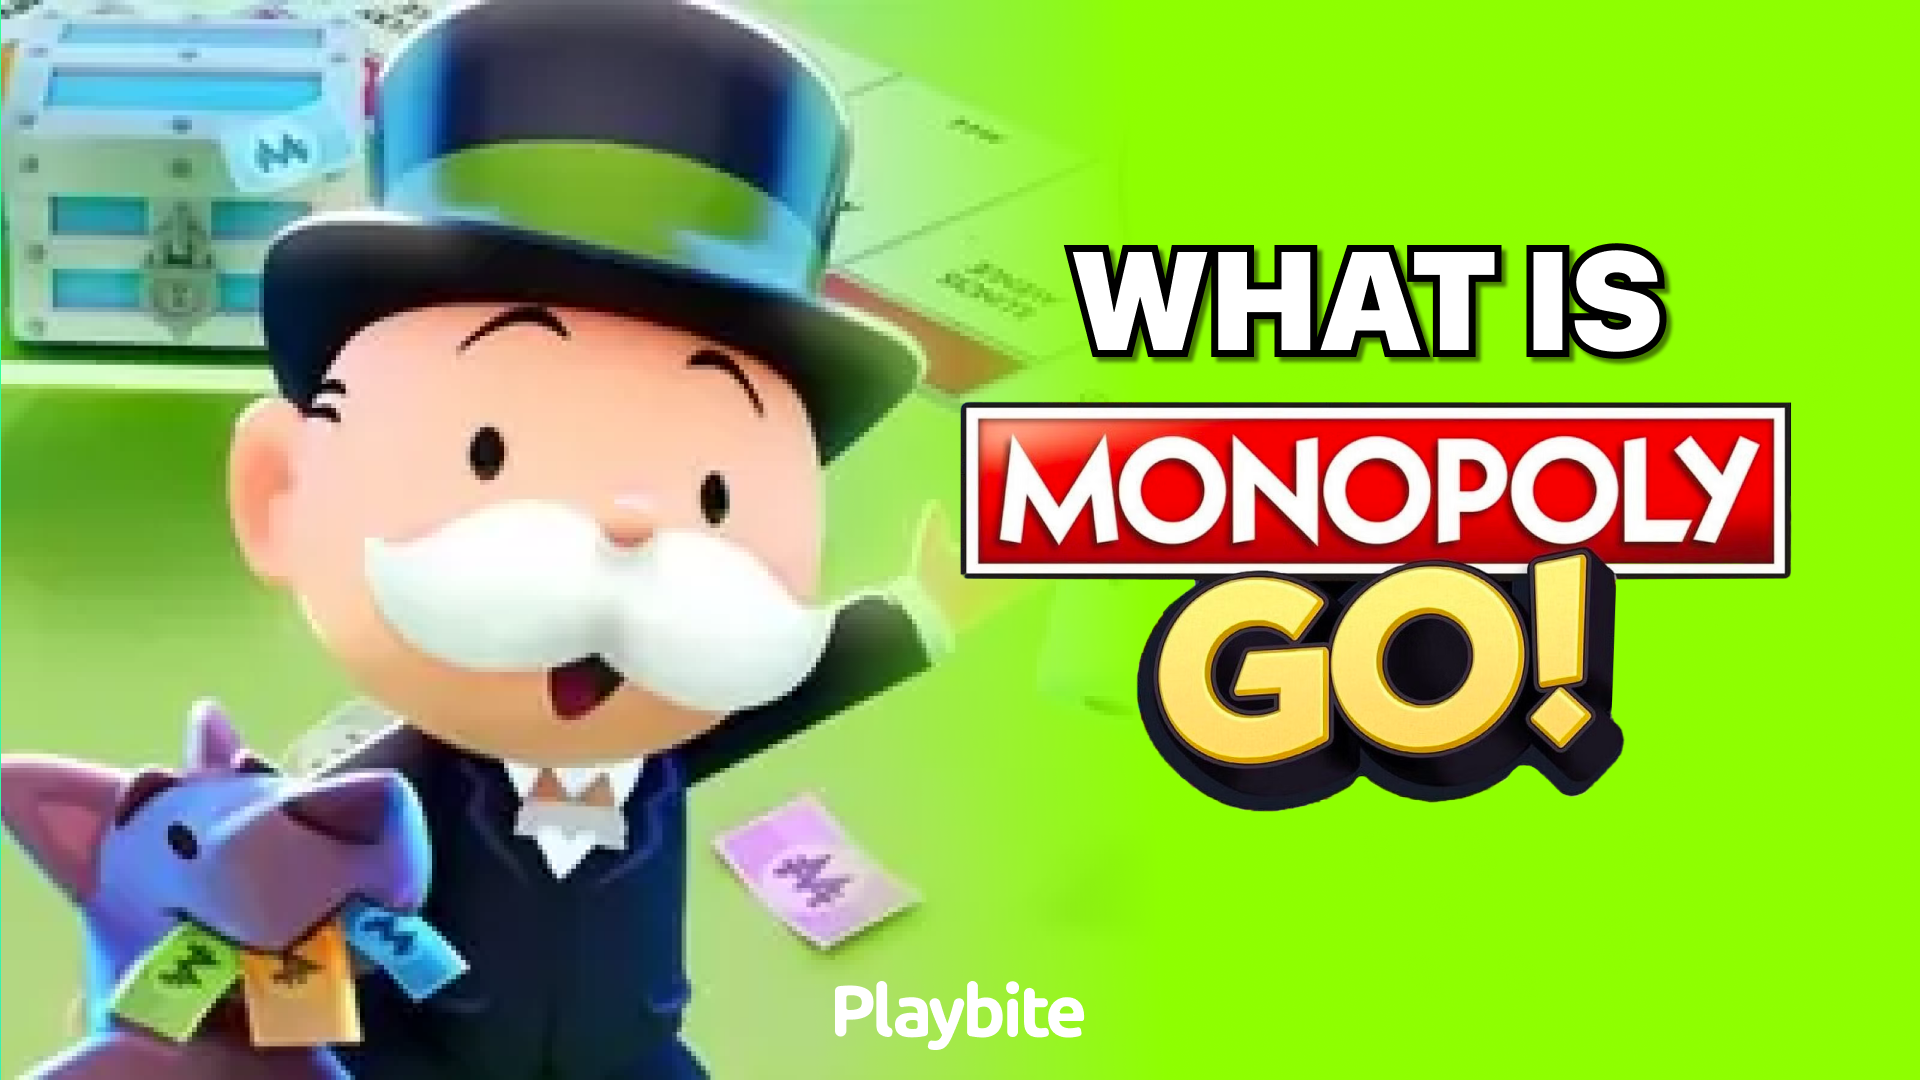 What Is Monopoly Go?